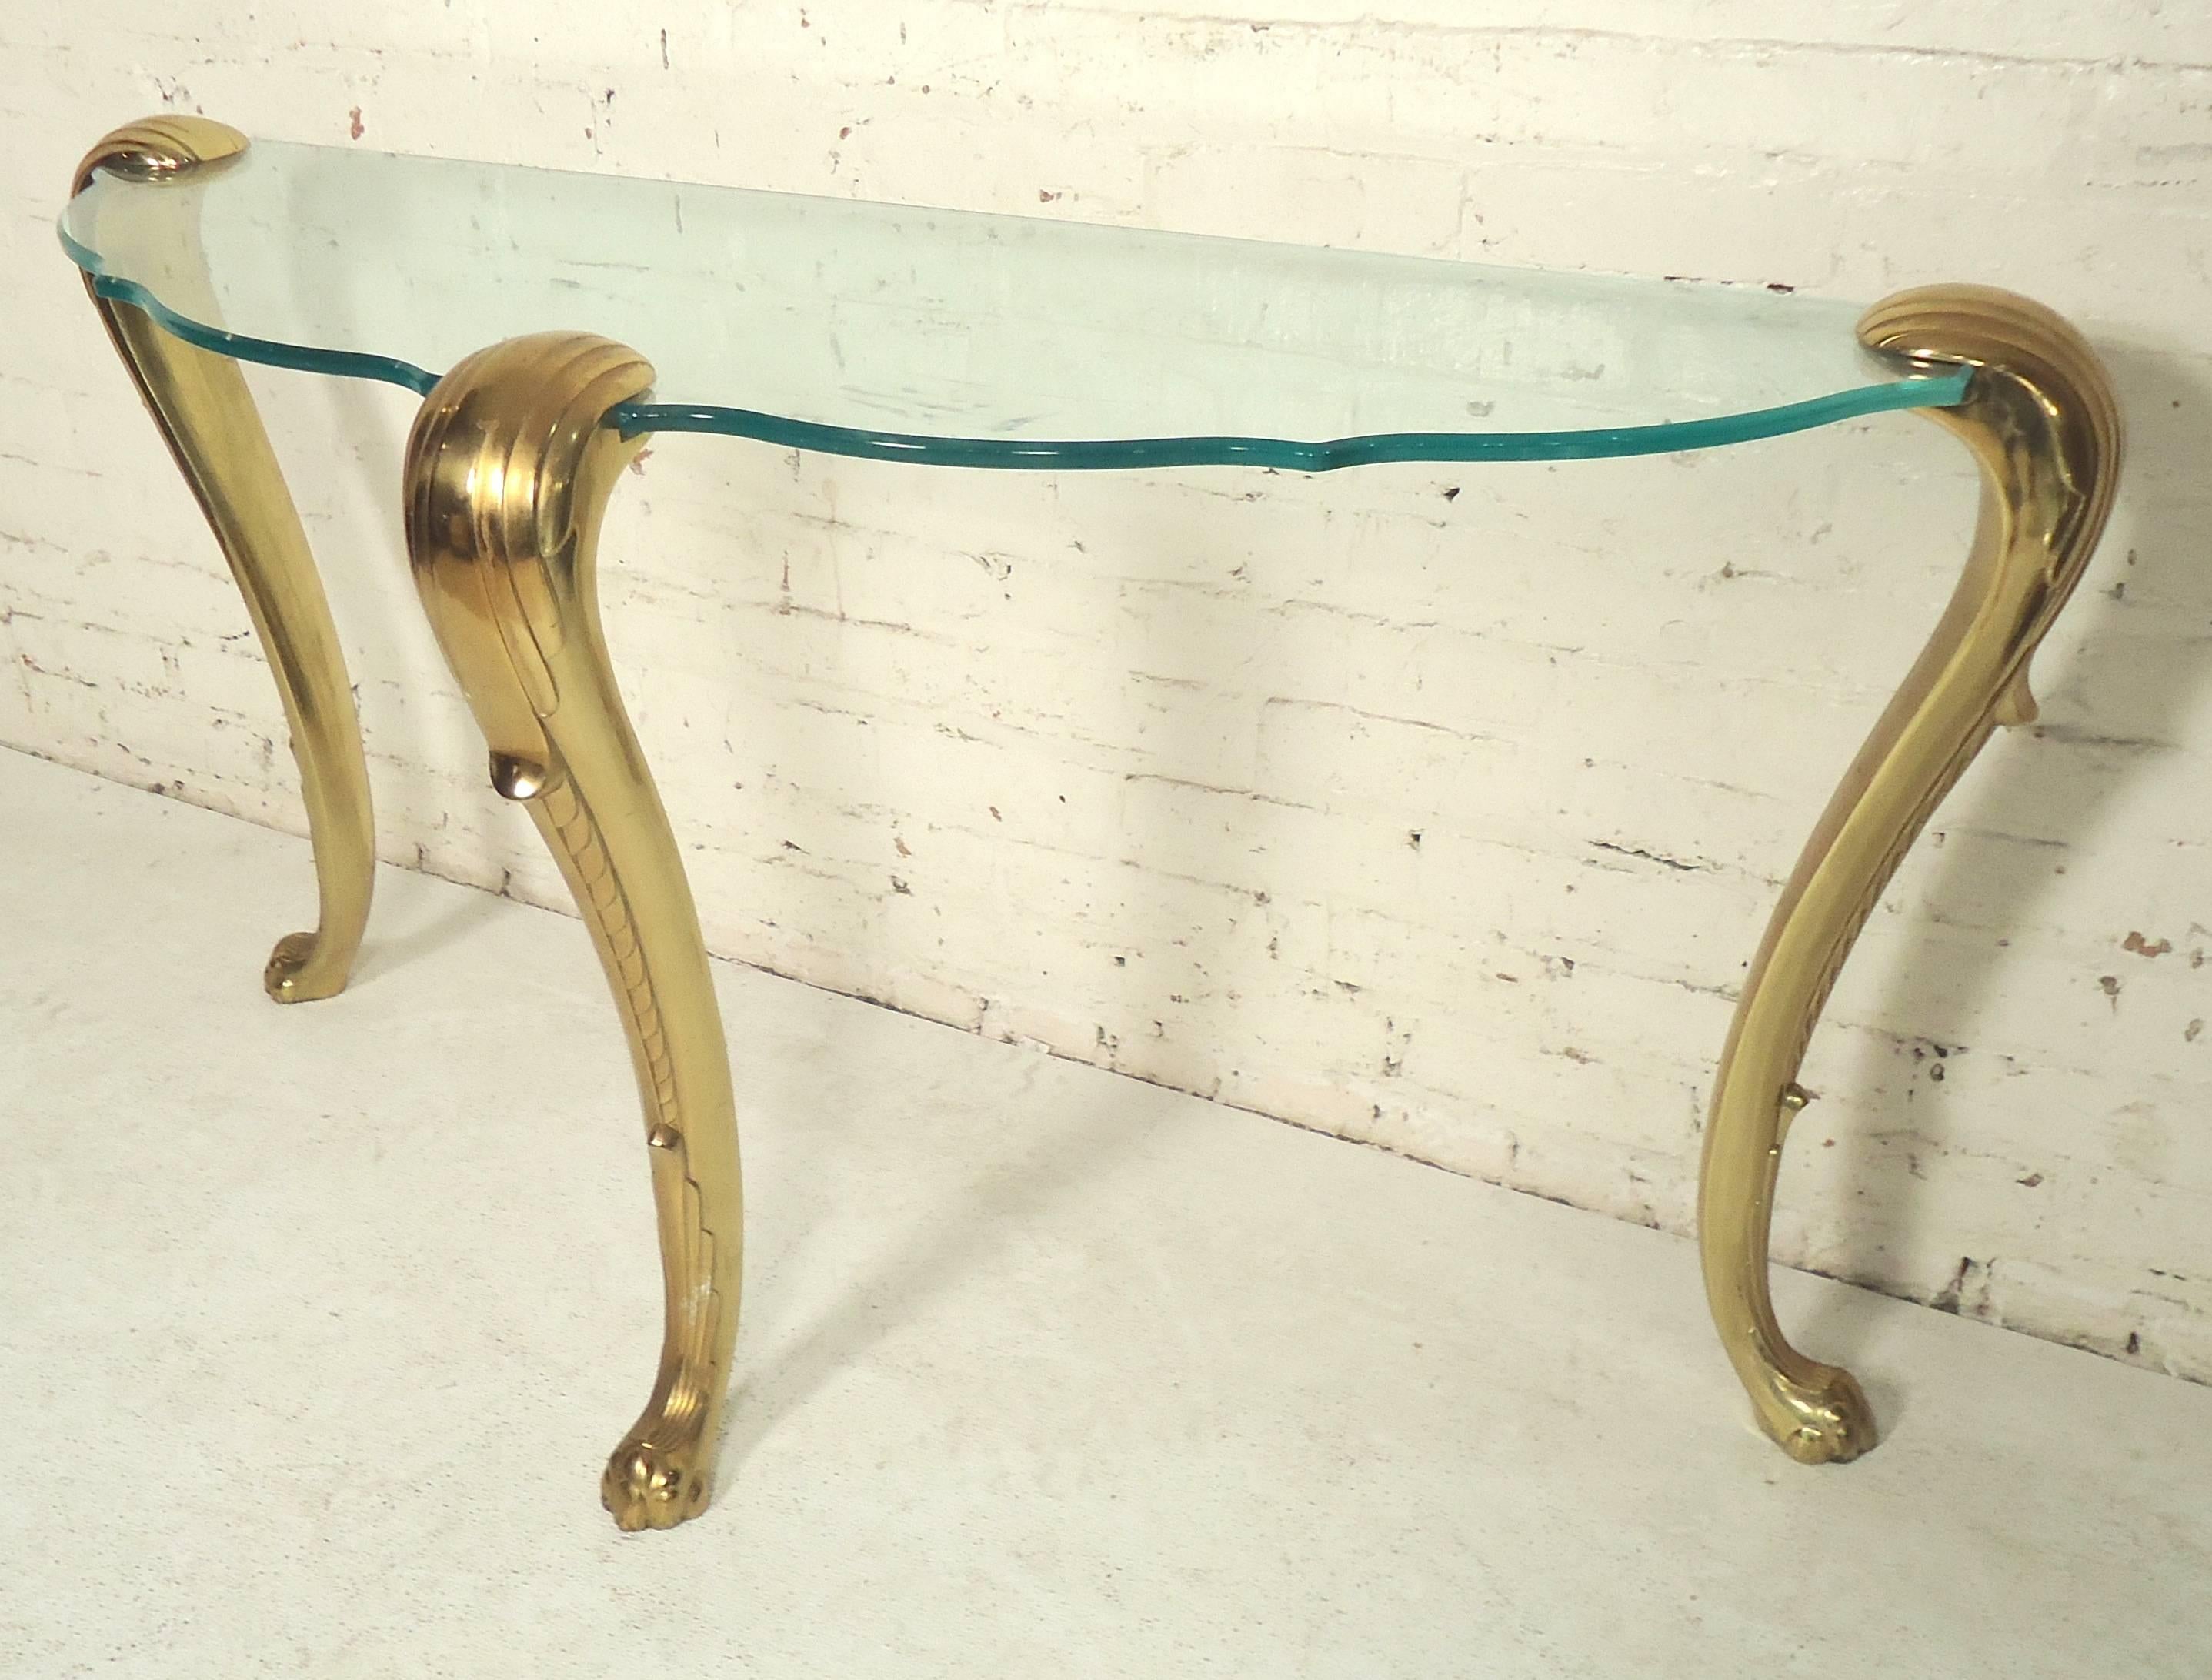 Beautiful hall table with beveled shaped glass, set on three heavy brass sculpted legs with claw feet.

(Please confirm item location - NY or NJ - with dealer)
